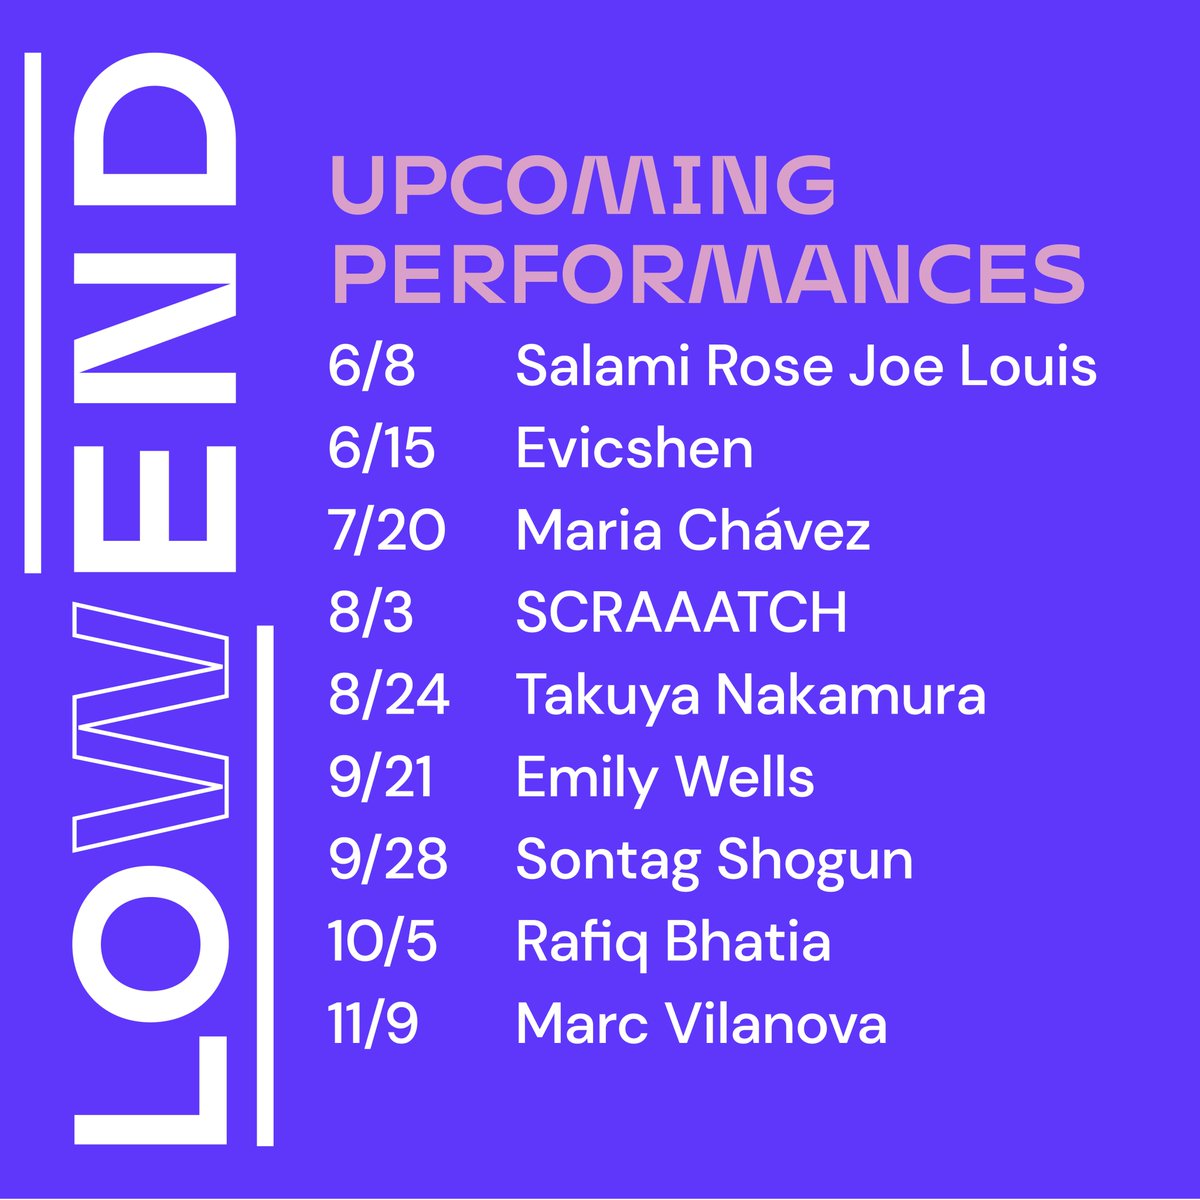 There are so many amazing artists coming to the LOW END stage this year! Learn more at bemiscenter.org/low-end @salamirosejoelouis @evicshen @chavezsayz @scraaatch202 @space_tak @emilywellsmusic @sontagshogun @rafiqbhatia @marcvilanovapinyol #bemis #experimentalmusic #soundart